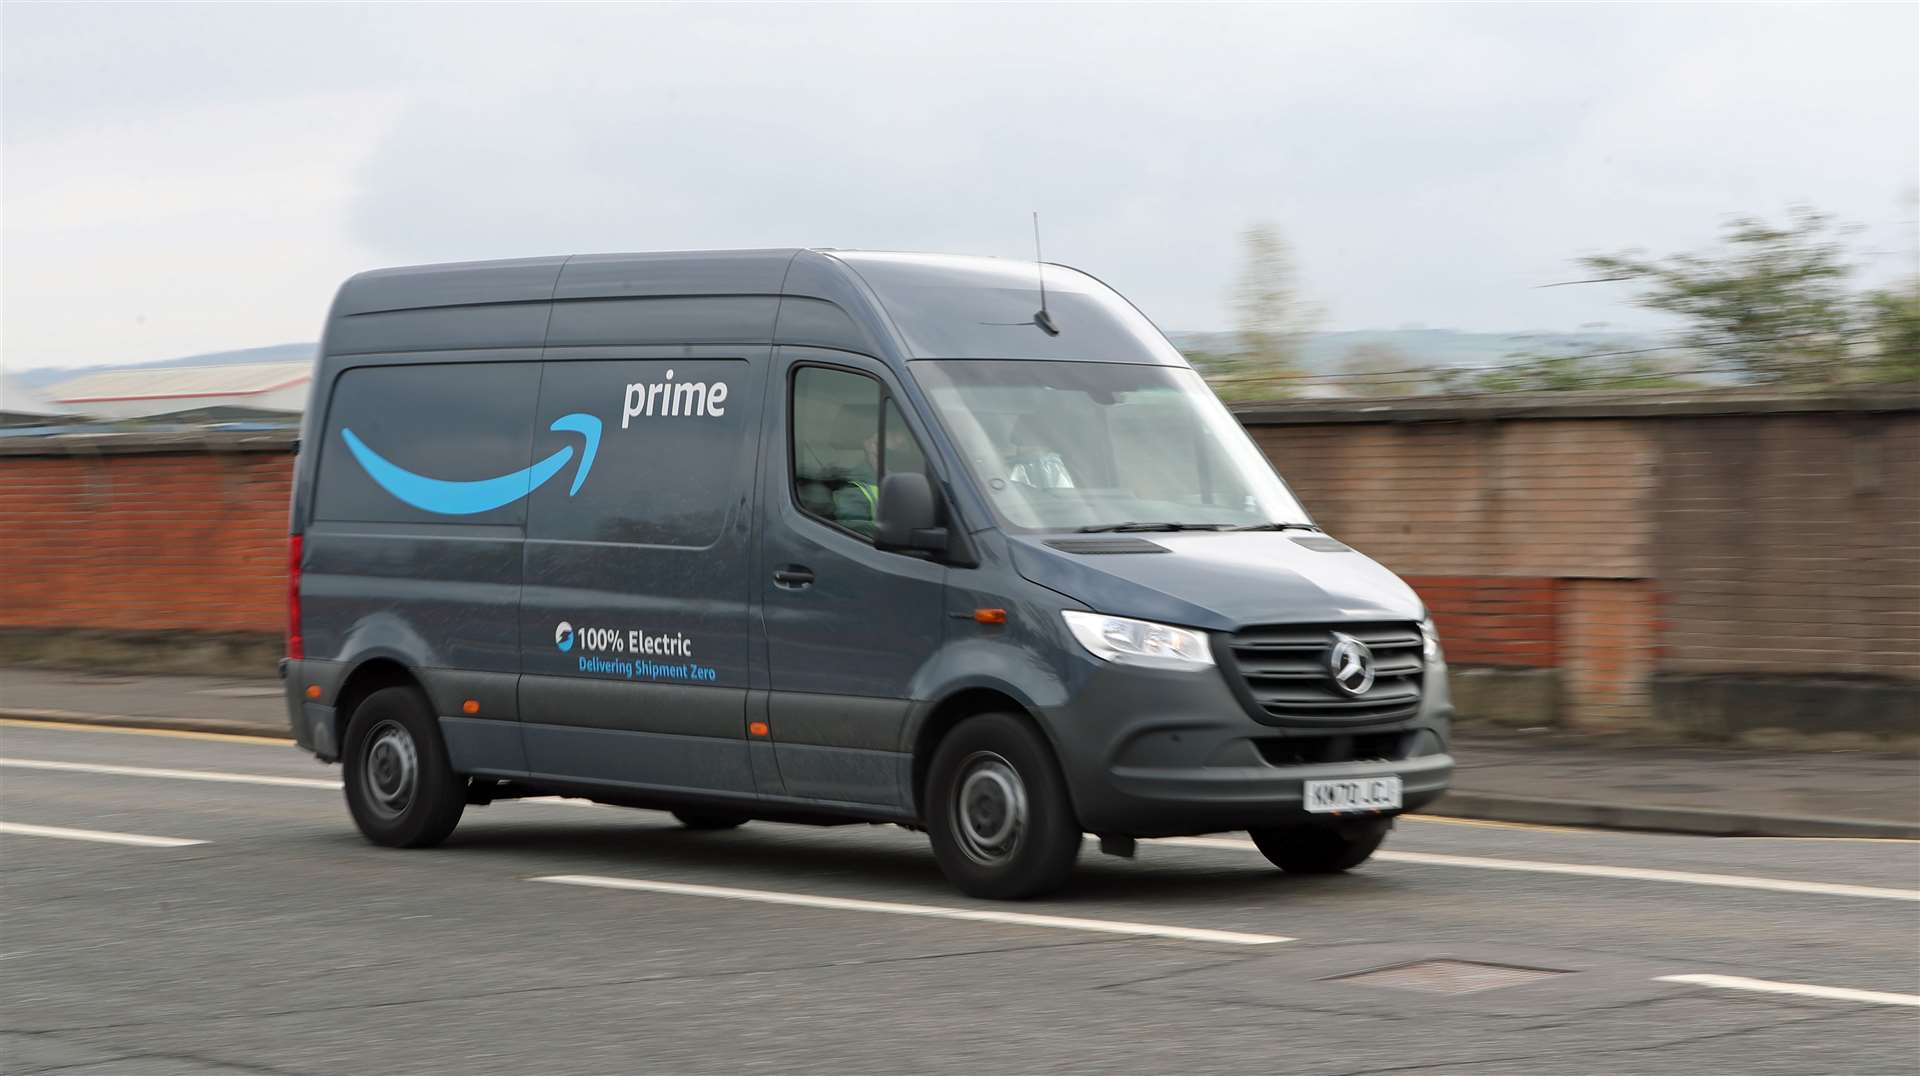 Amazon had more than 9,000 electric vehicles in its global delivery fleet in 2022 (PA)